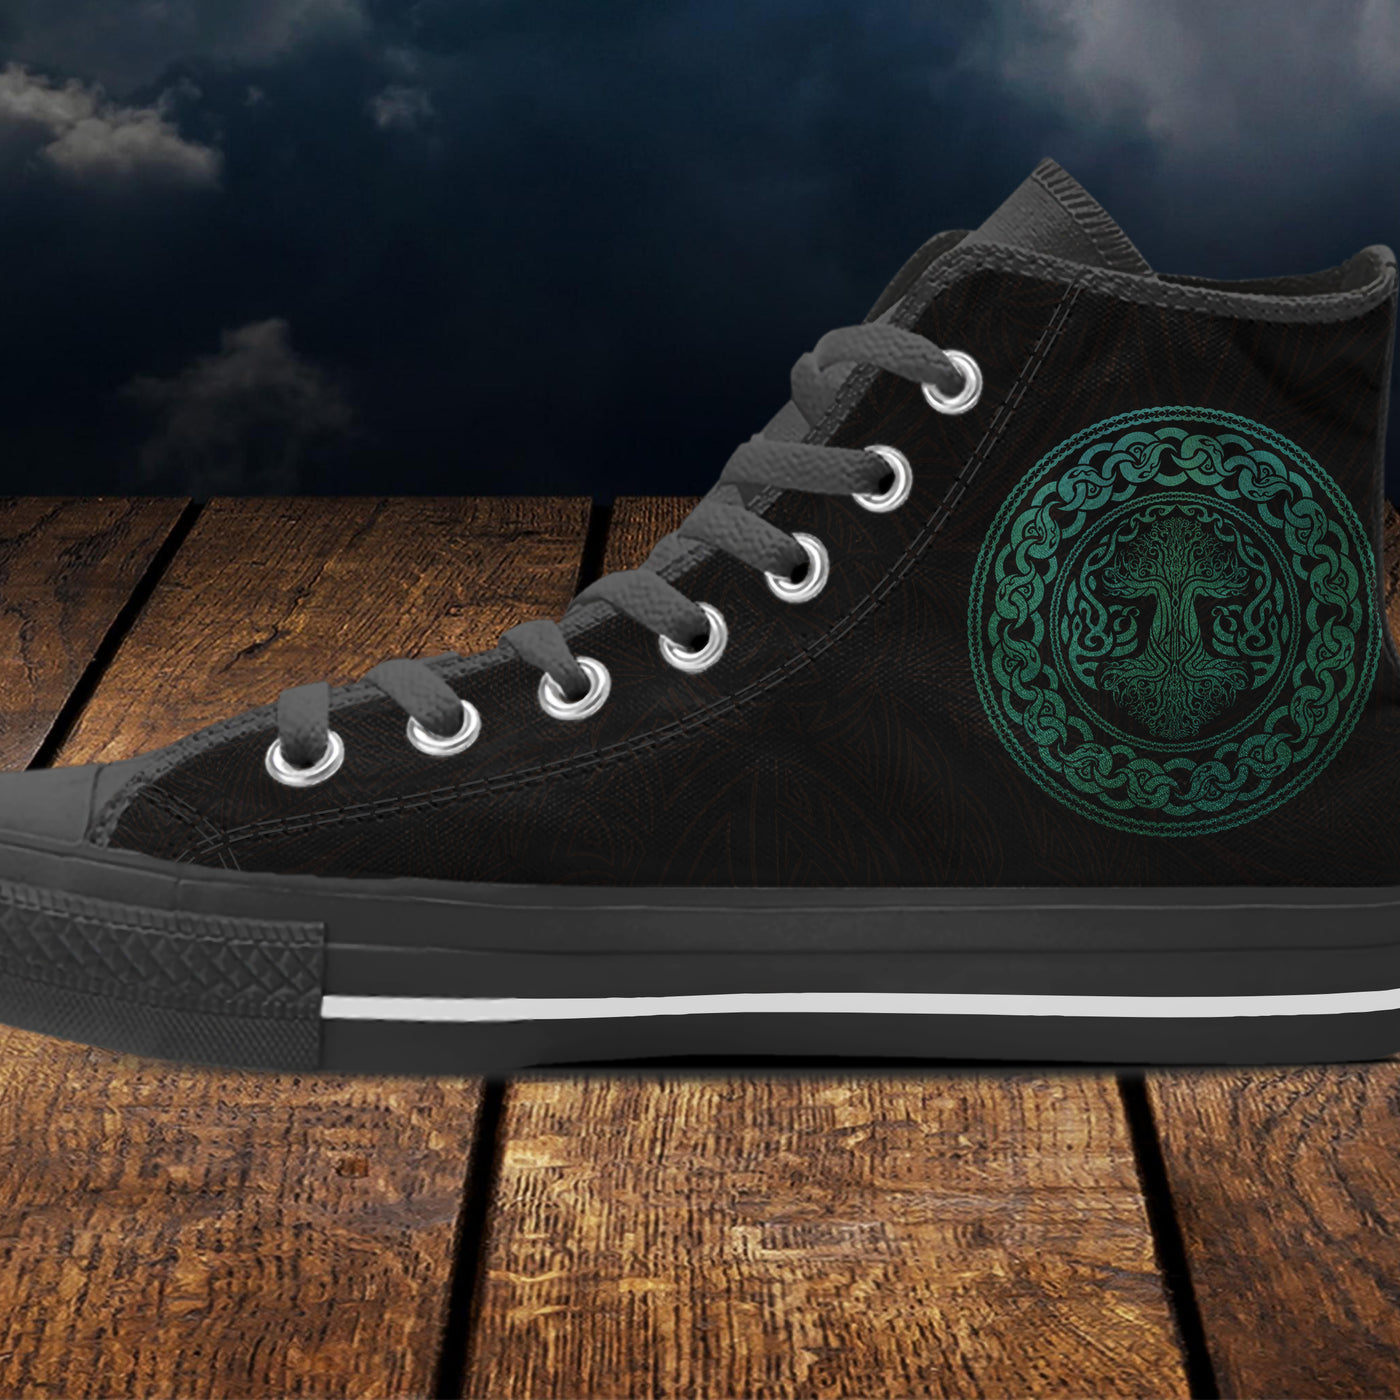 Dark Slate Gray Green Celtic Knot Tree Of Life | Men’s Classic High Top Canvas Shoes